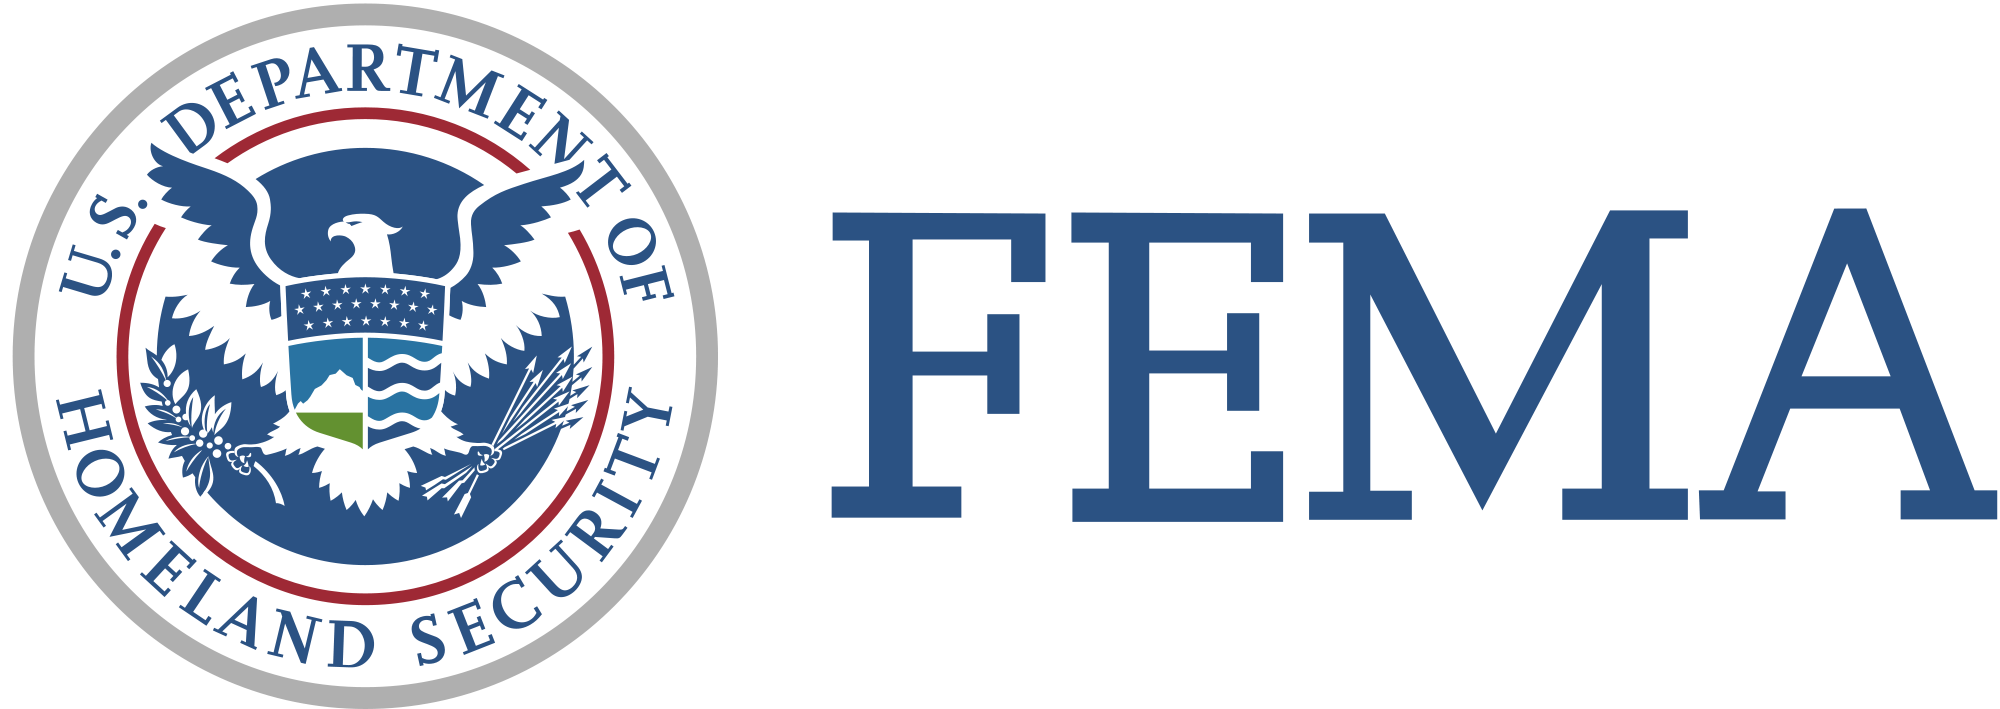 Federal Emergency Management Agency seal and logo